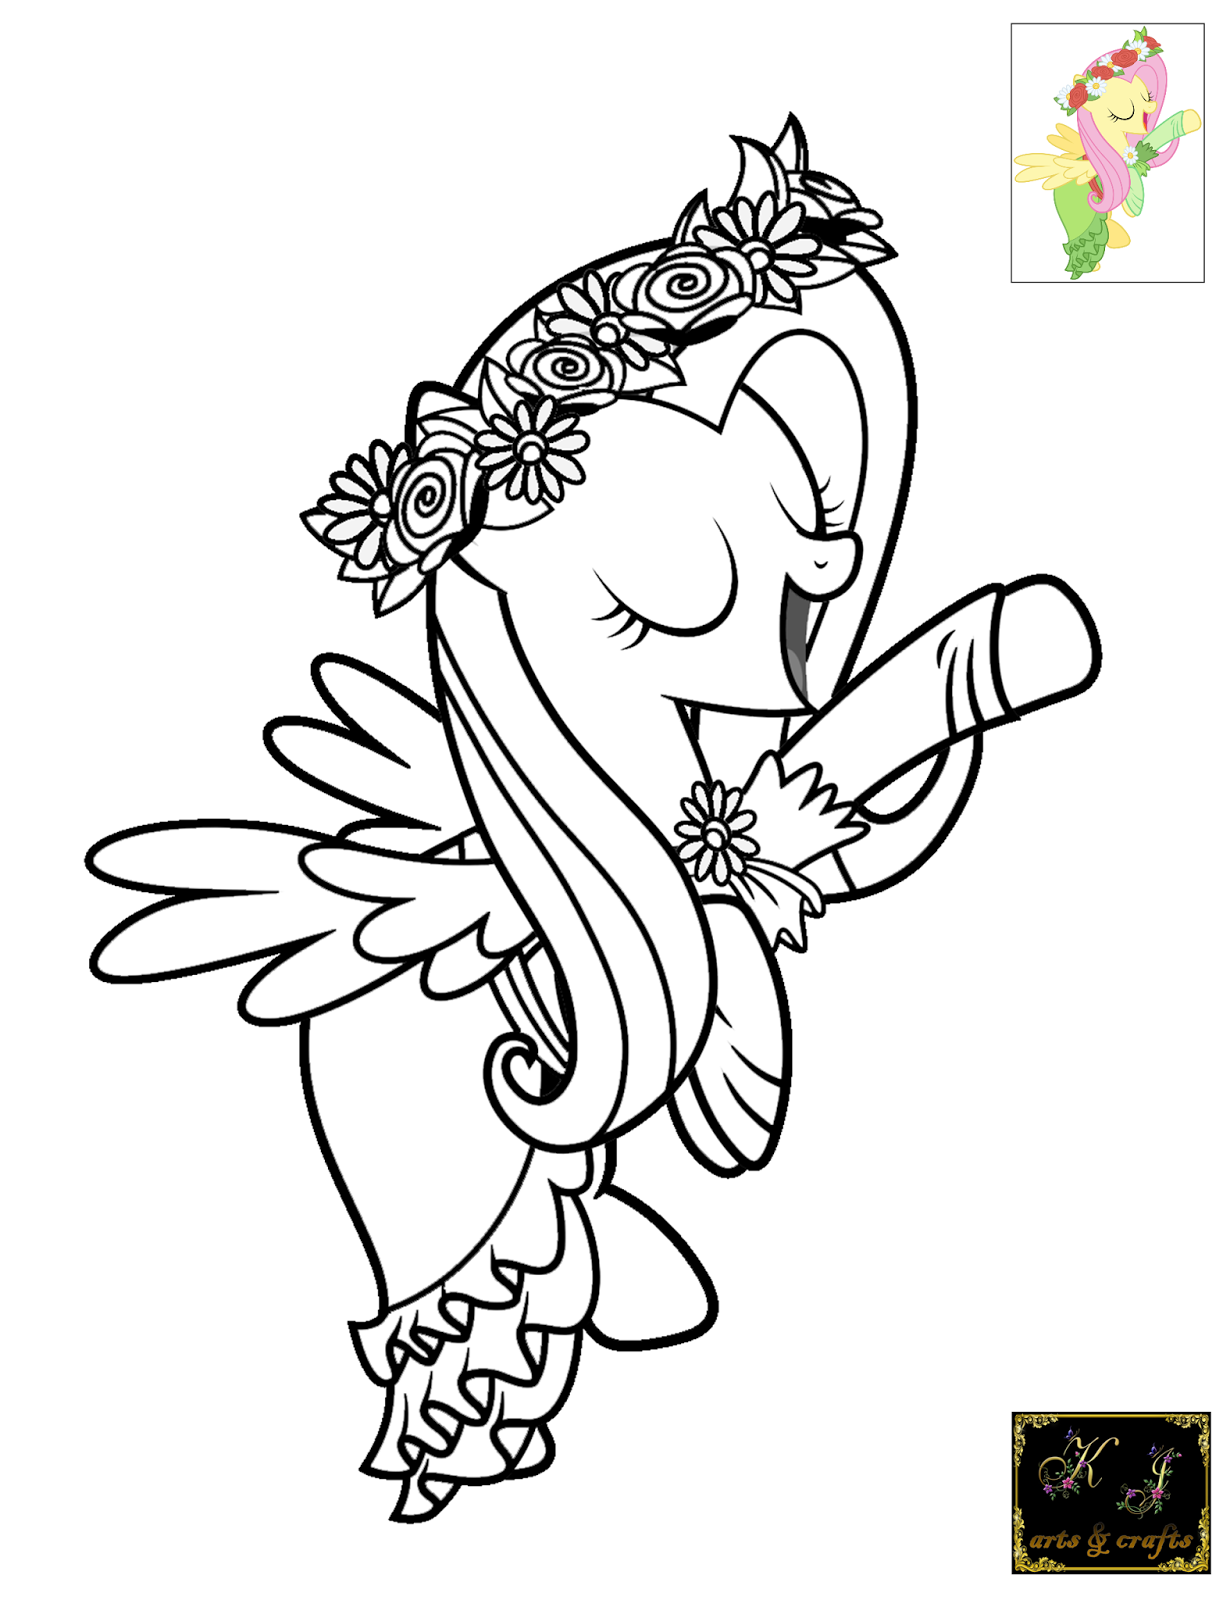 My Little Pony Fluttershy Coloring Page - Coloring and Drawing